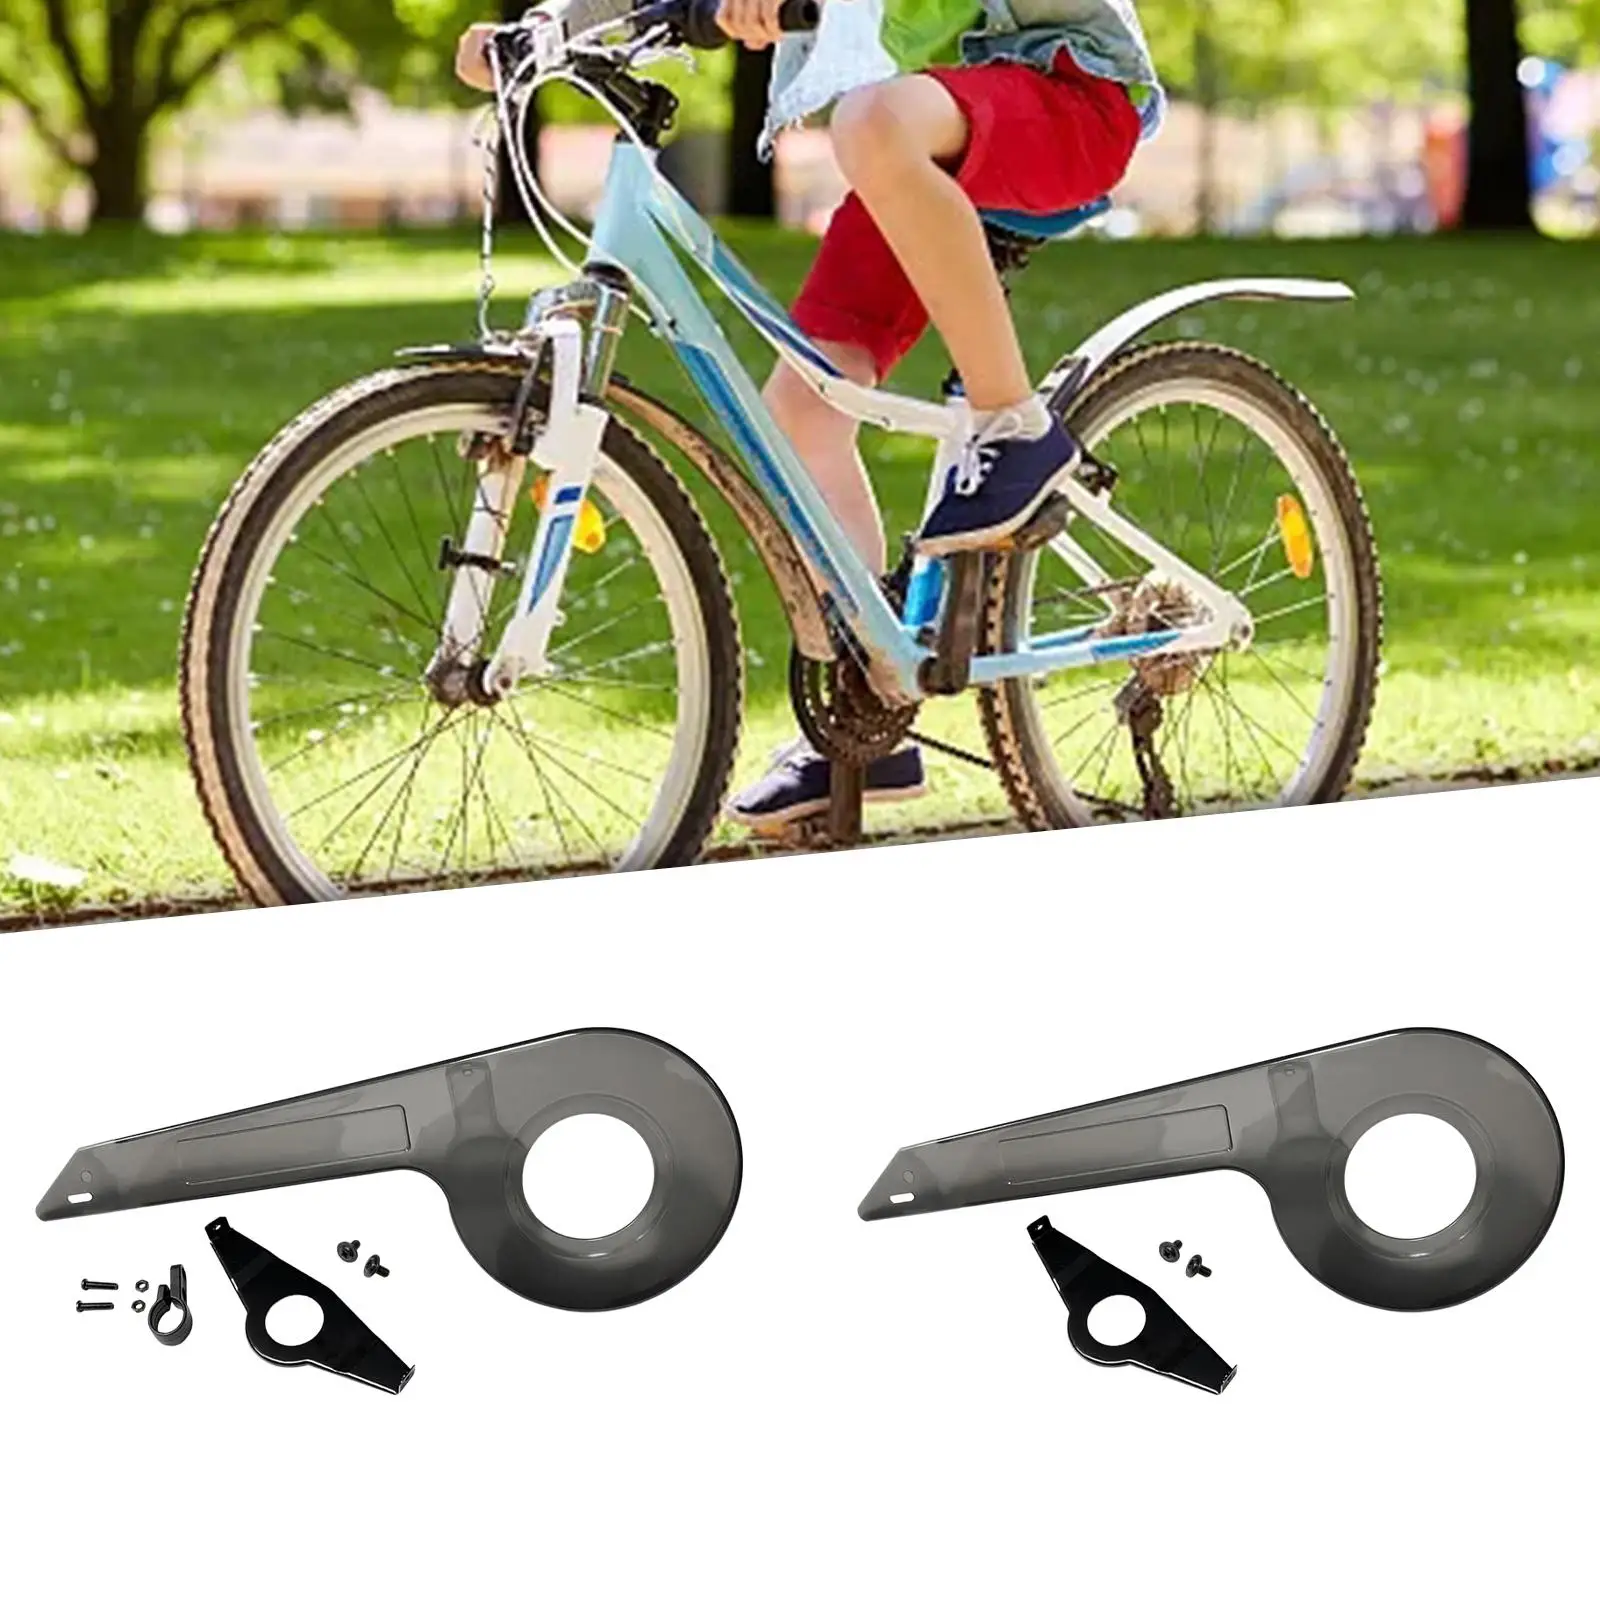 Bike Chain Cover Wheel Crankset Protector Practical Cycling Accessories Easy to